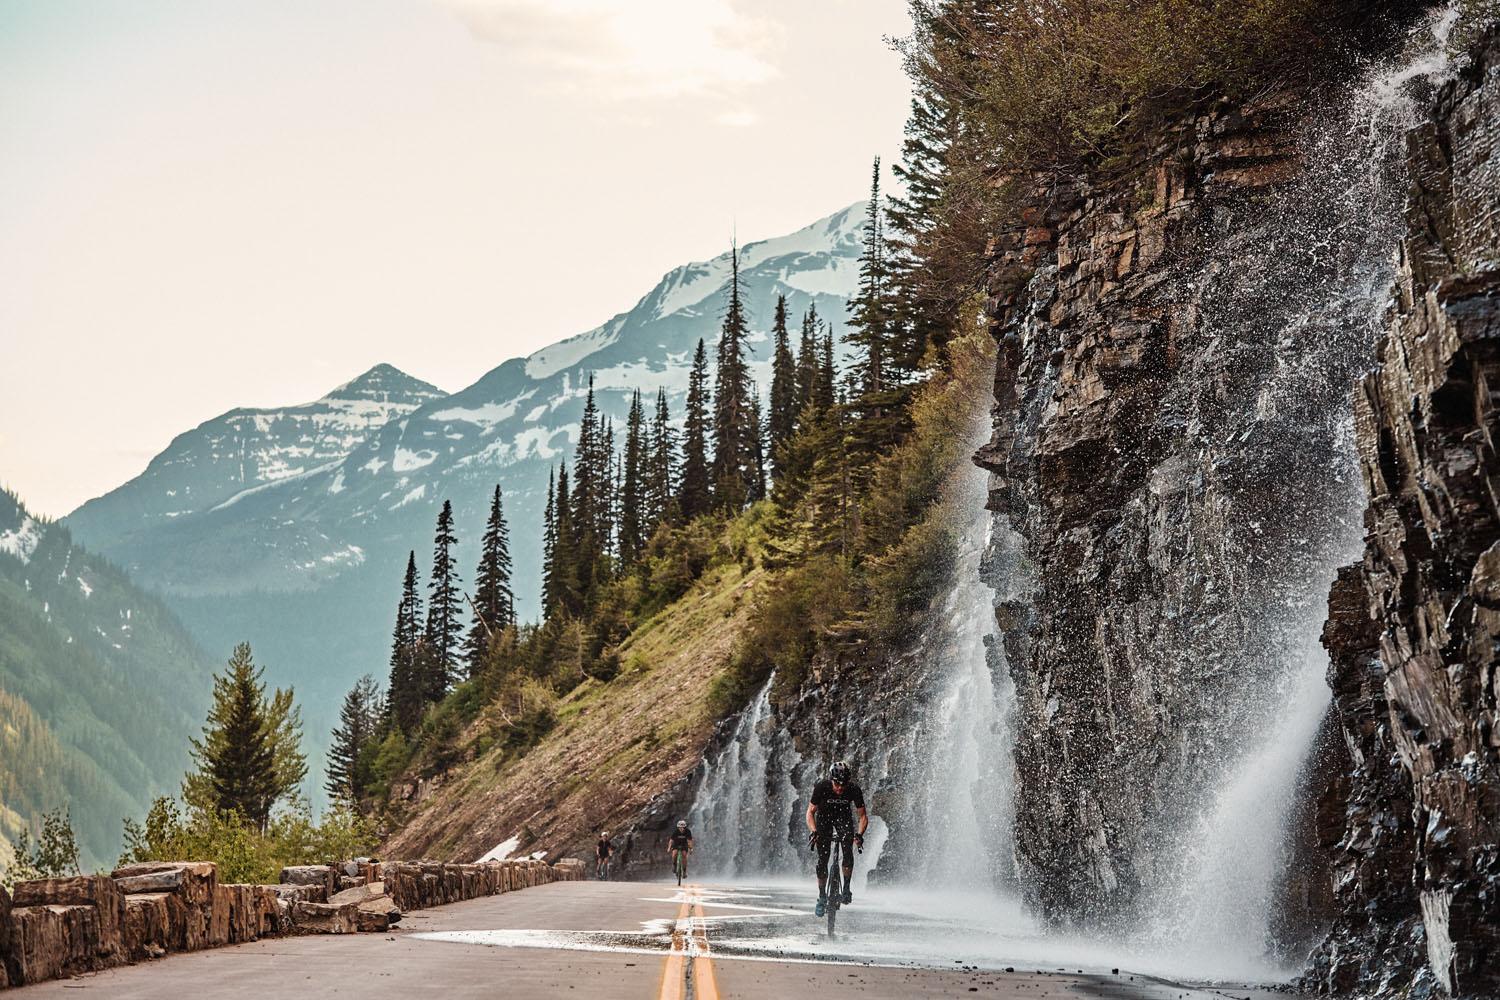 The Weeping Wall offers a nice cool off on the way up. // Photo: Jordan Haggard